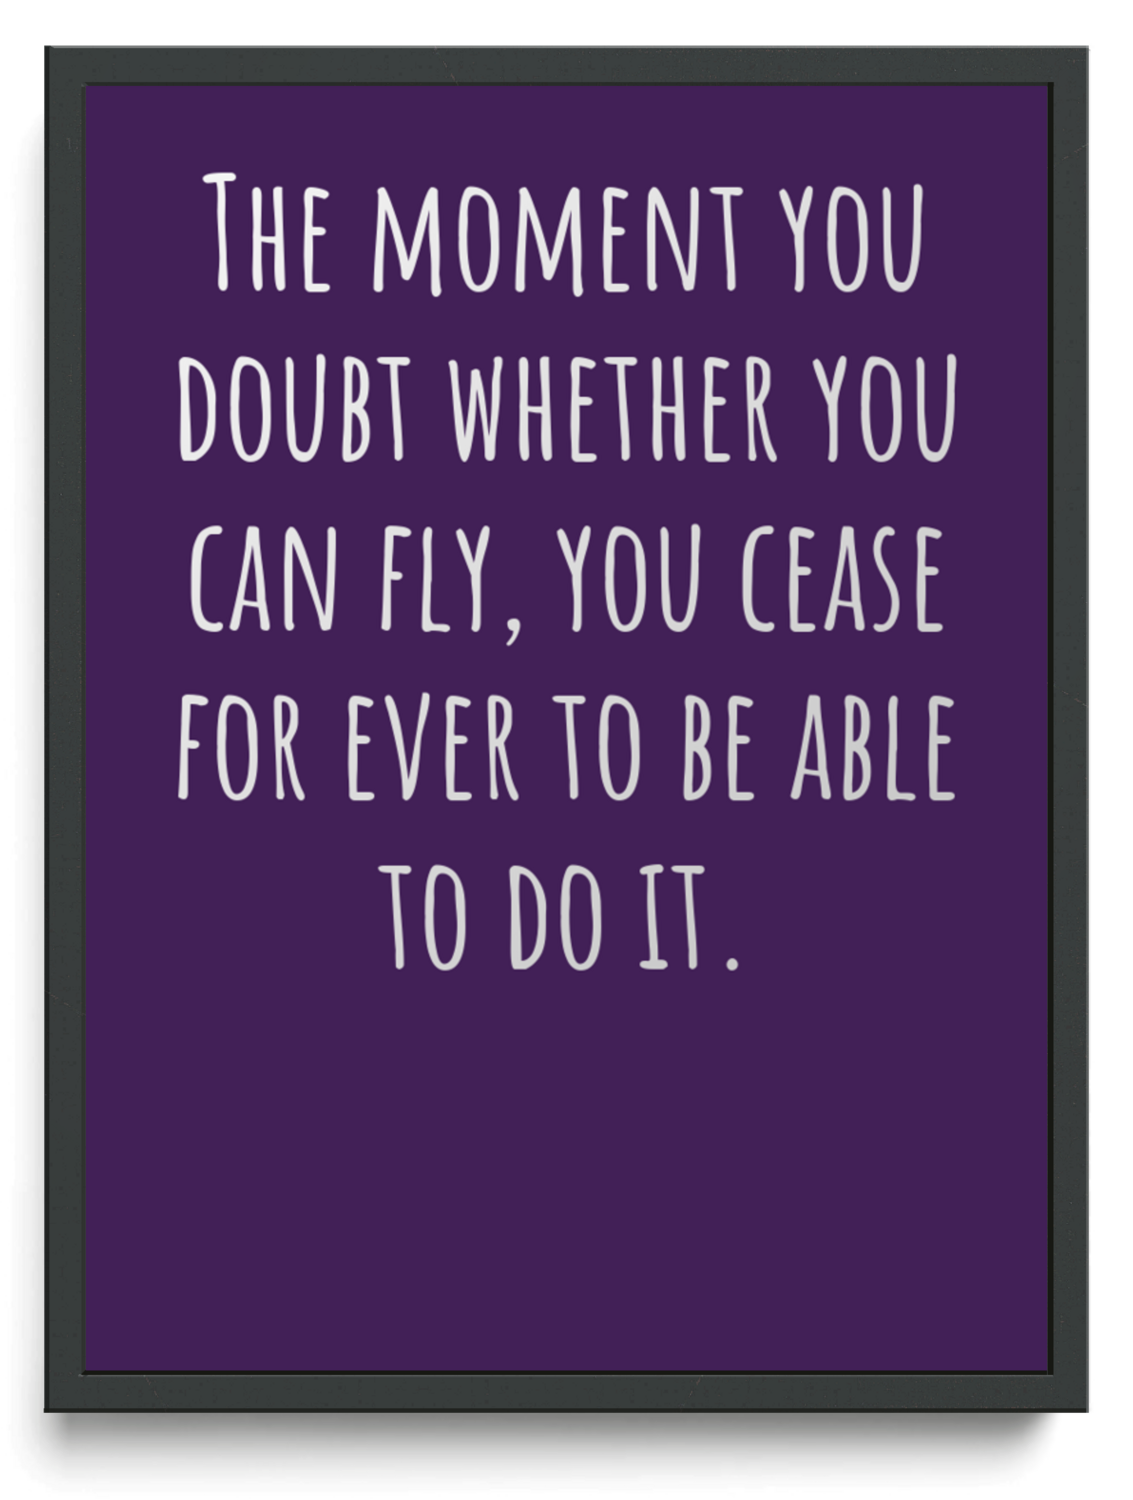 The moment you doubt whether you can fly you cease for ever to be able to do it framed typographic print